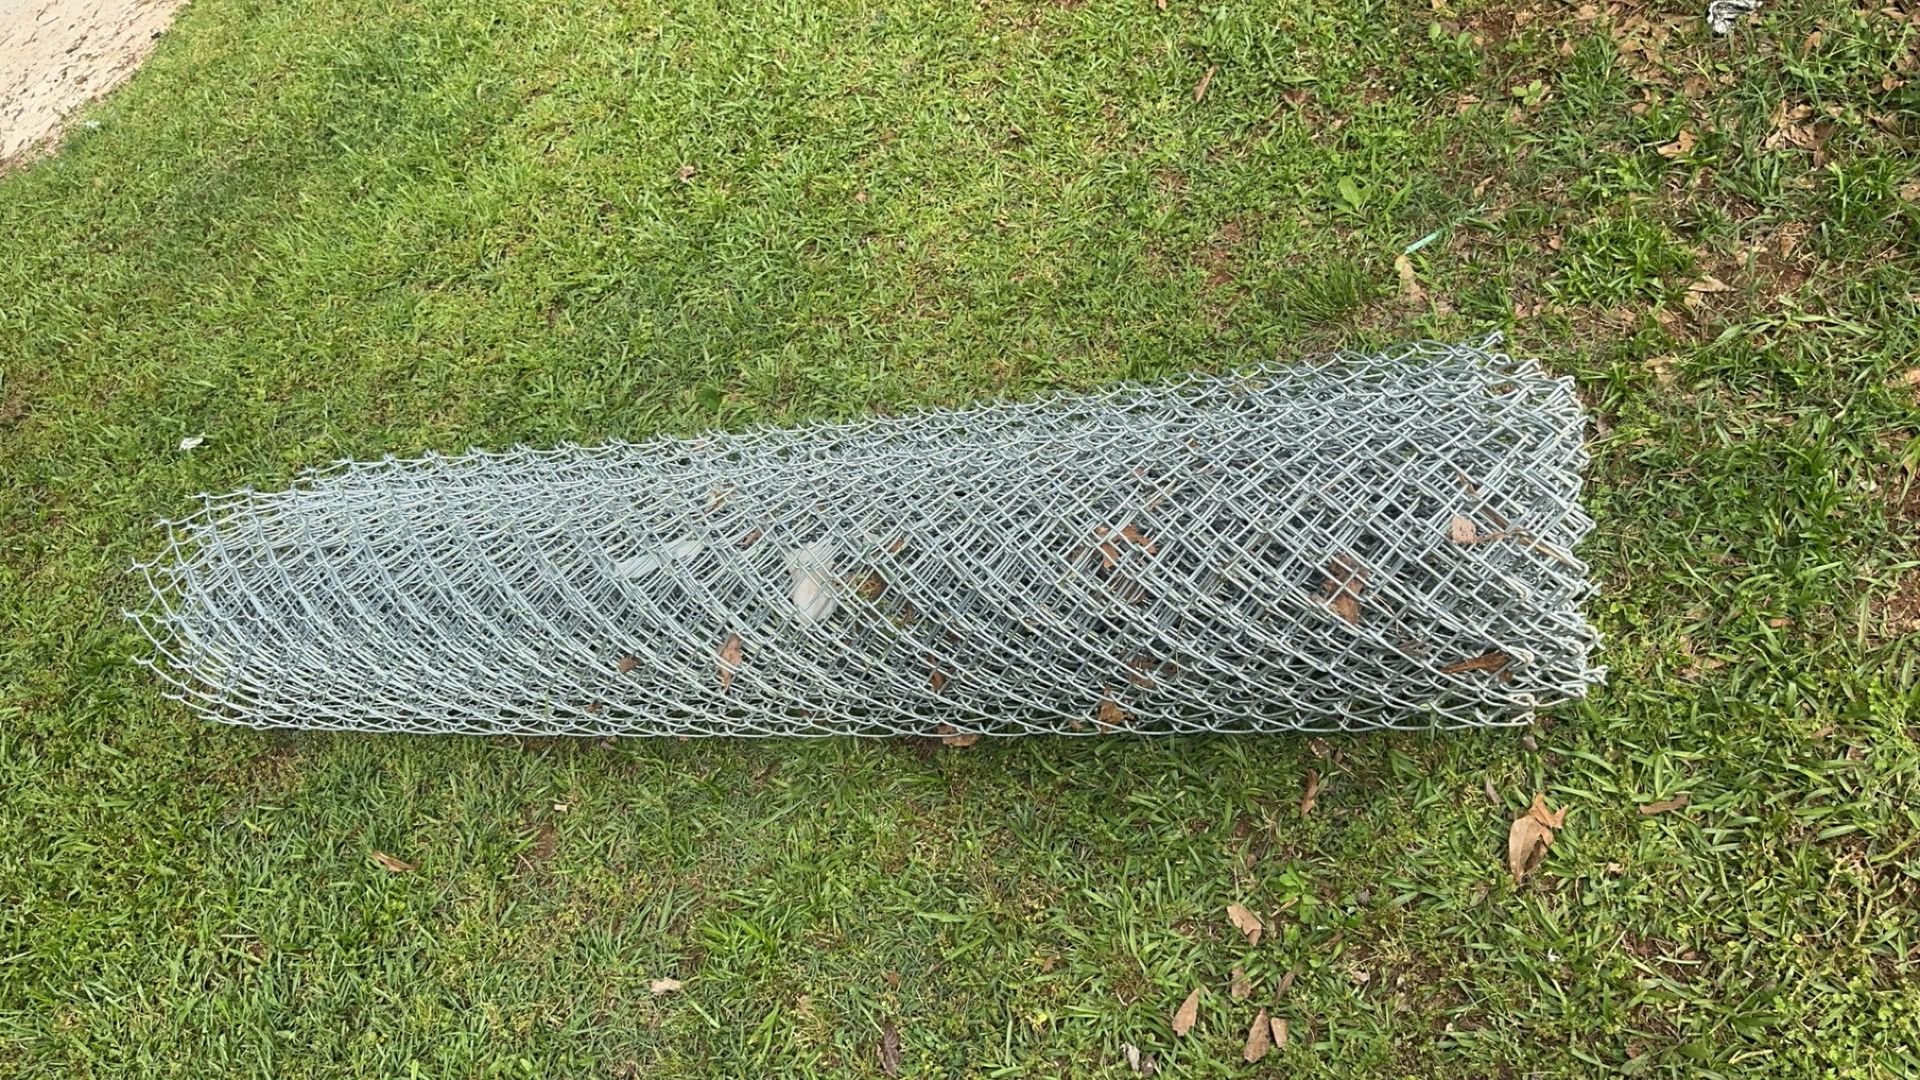 Chain Link Fence Roll